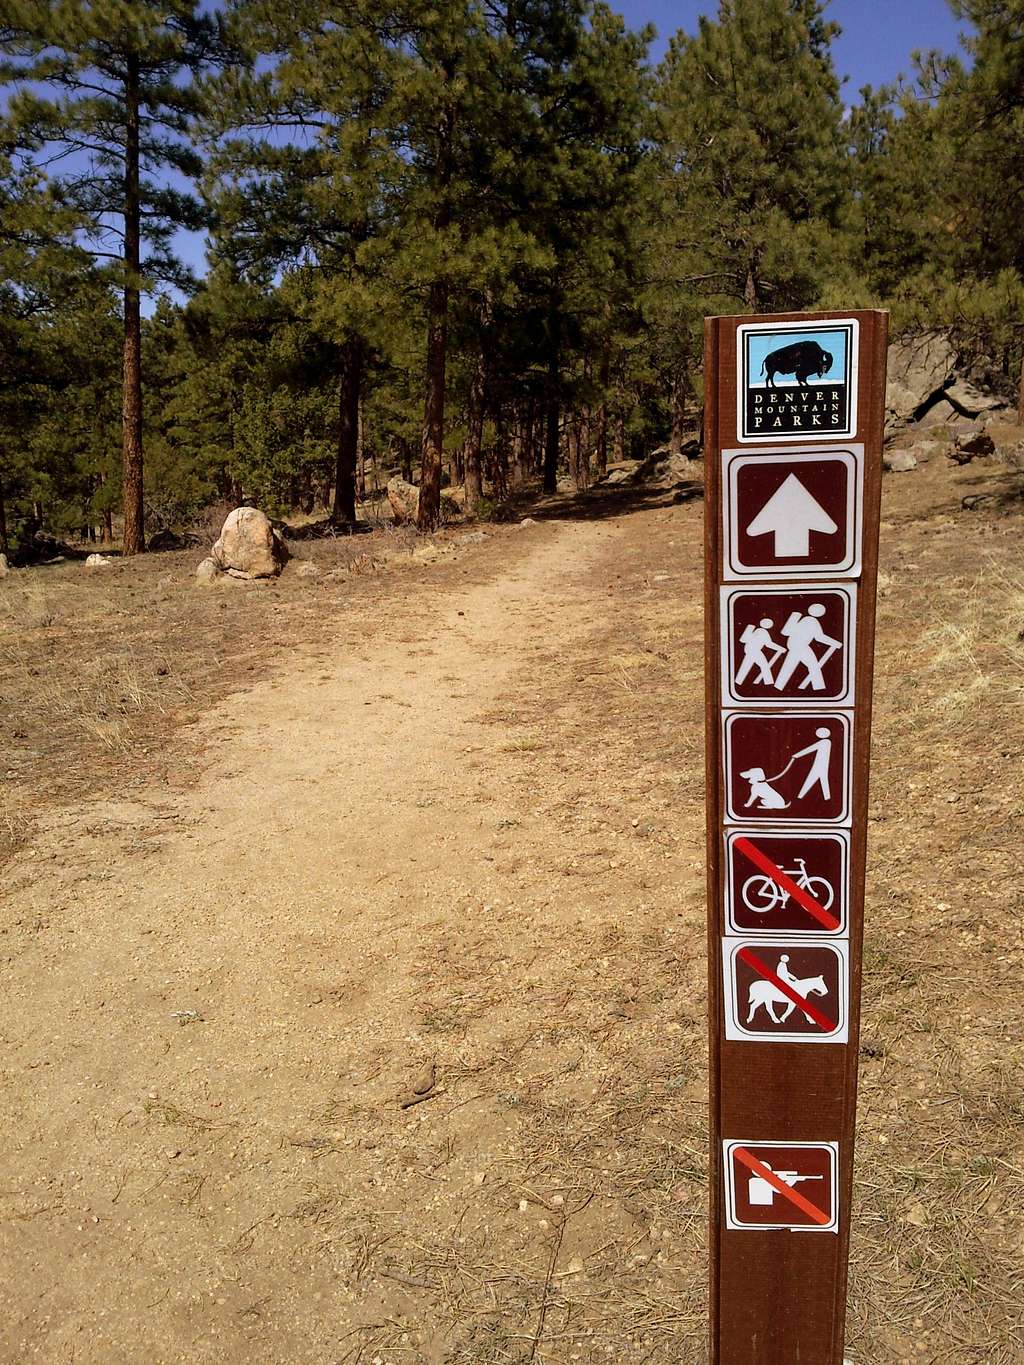 Trail to the summit